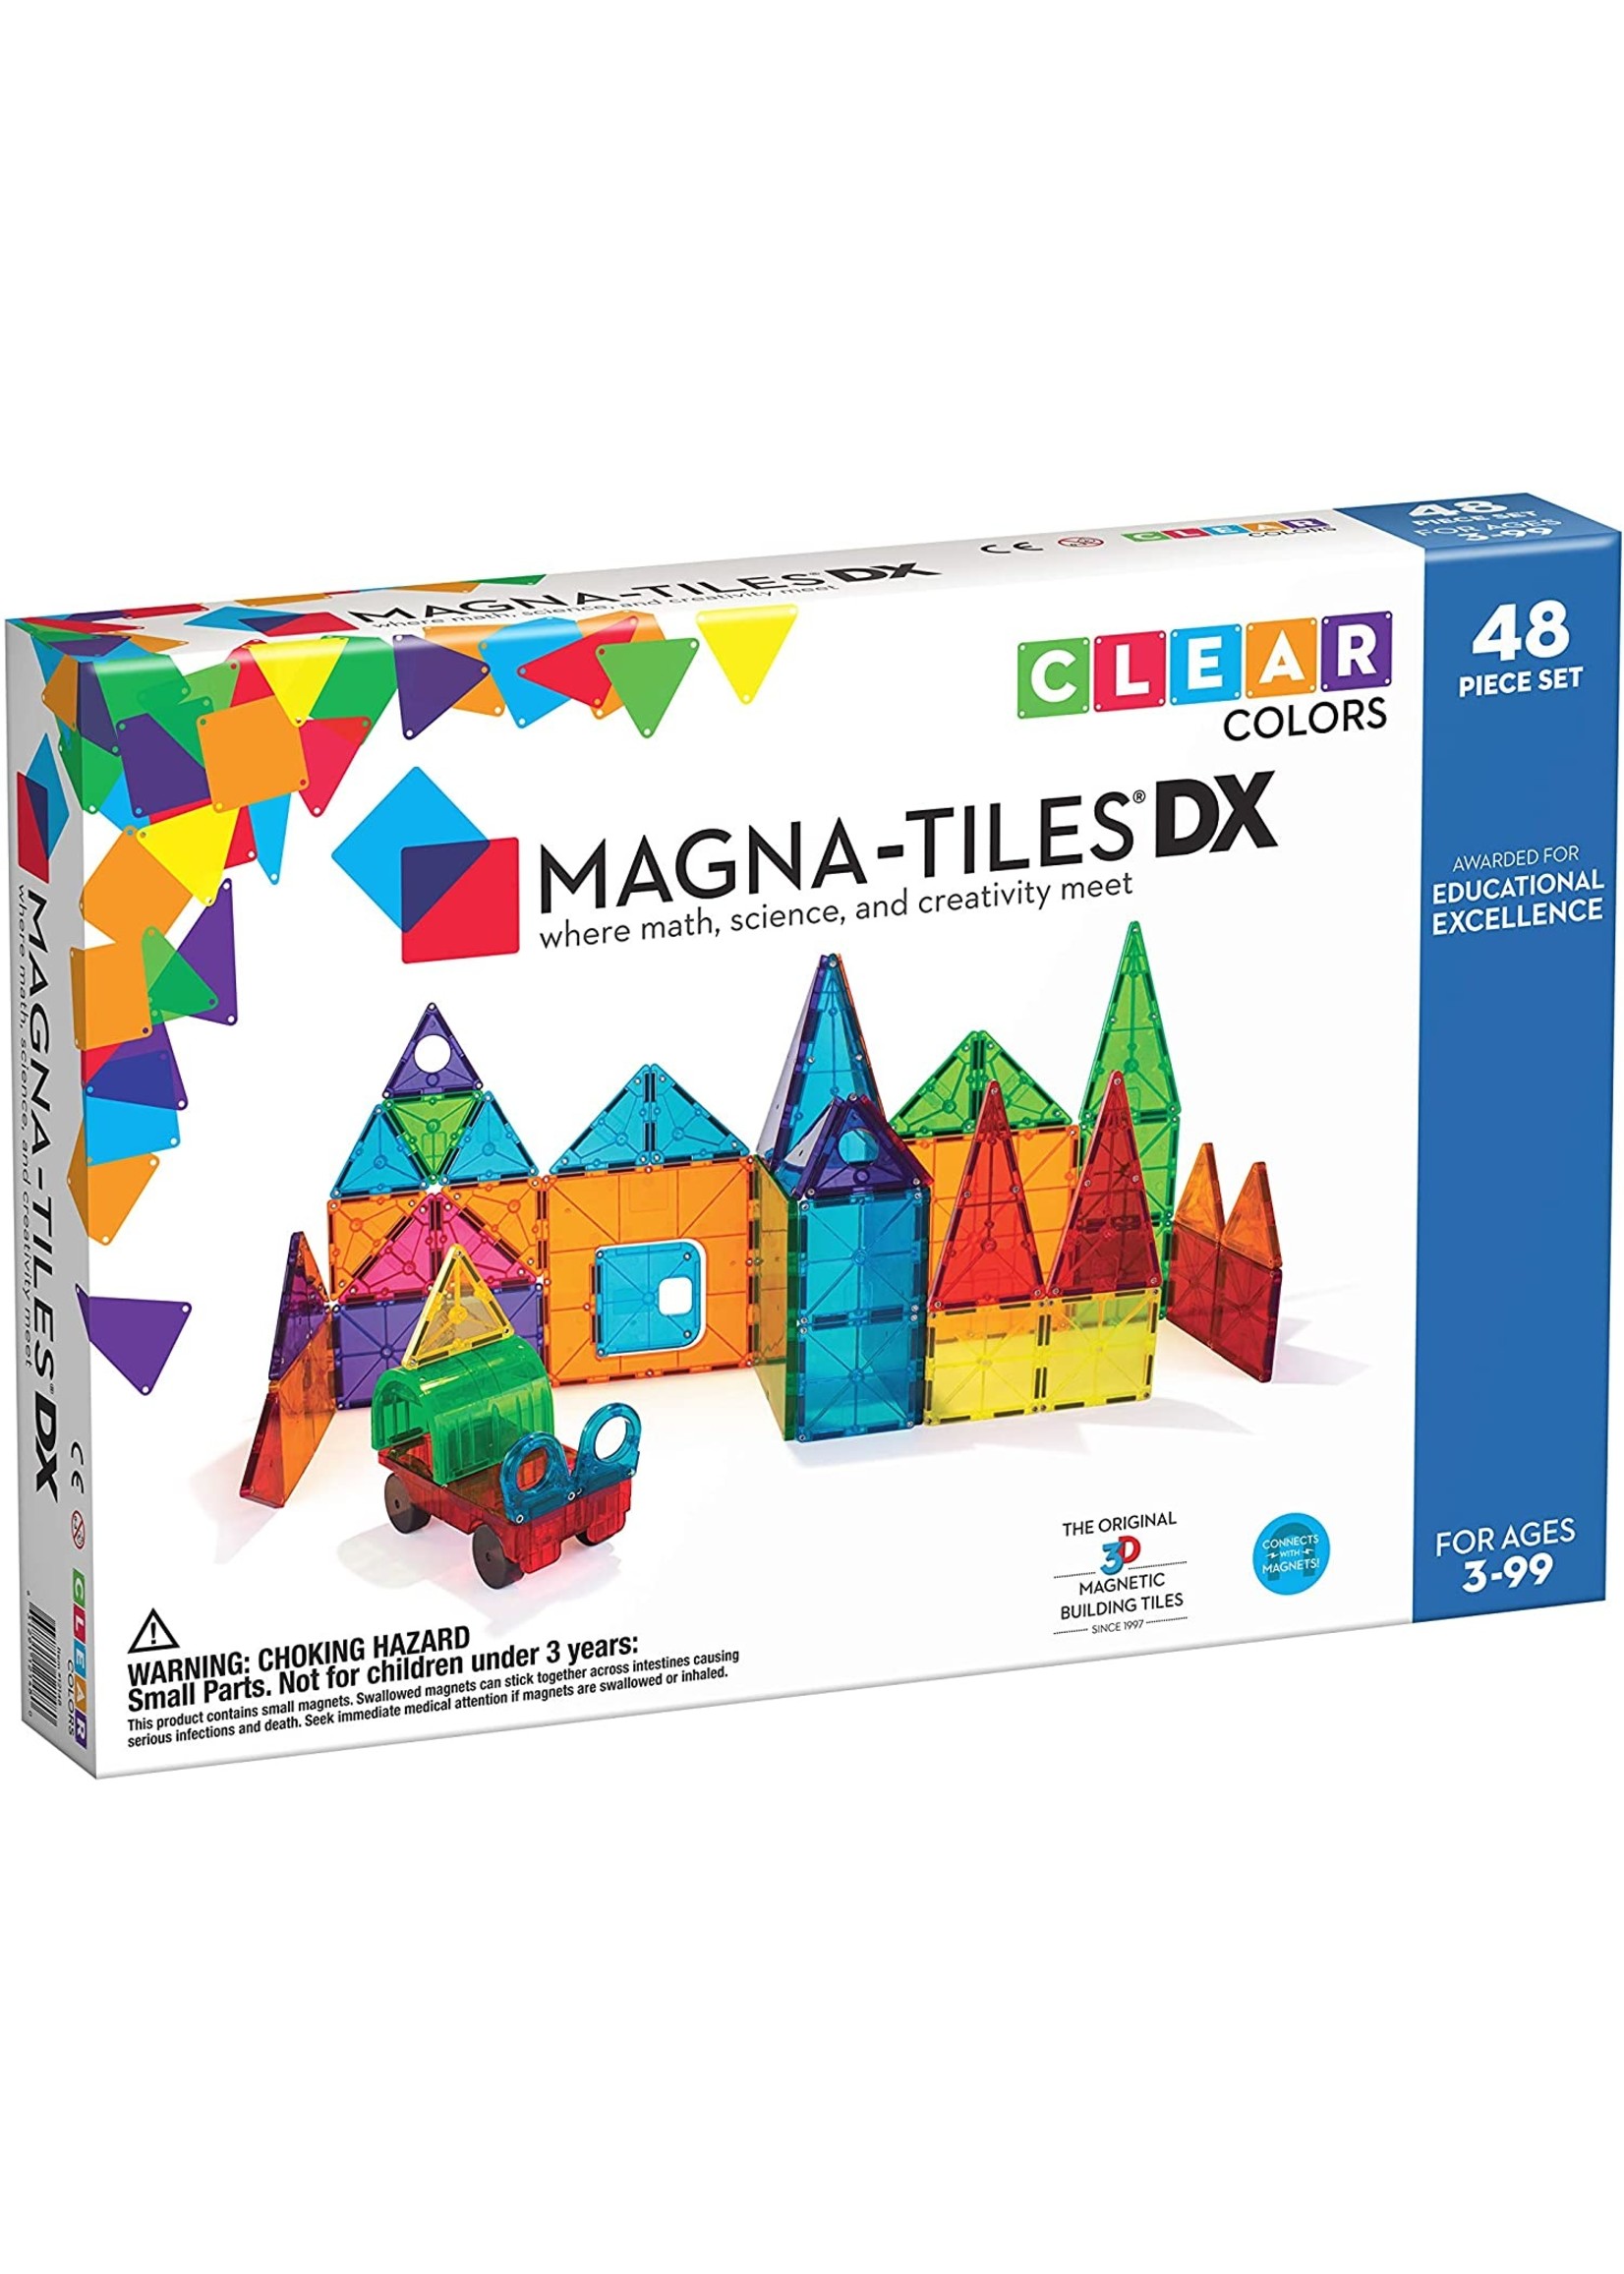 MAGNA-TILES STORAGE BIN & PLAY MAT - THE TOY STORE